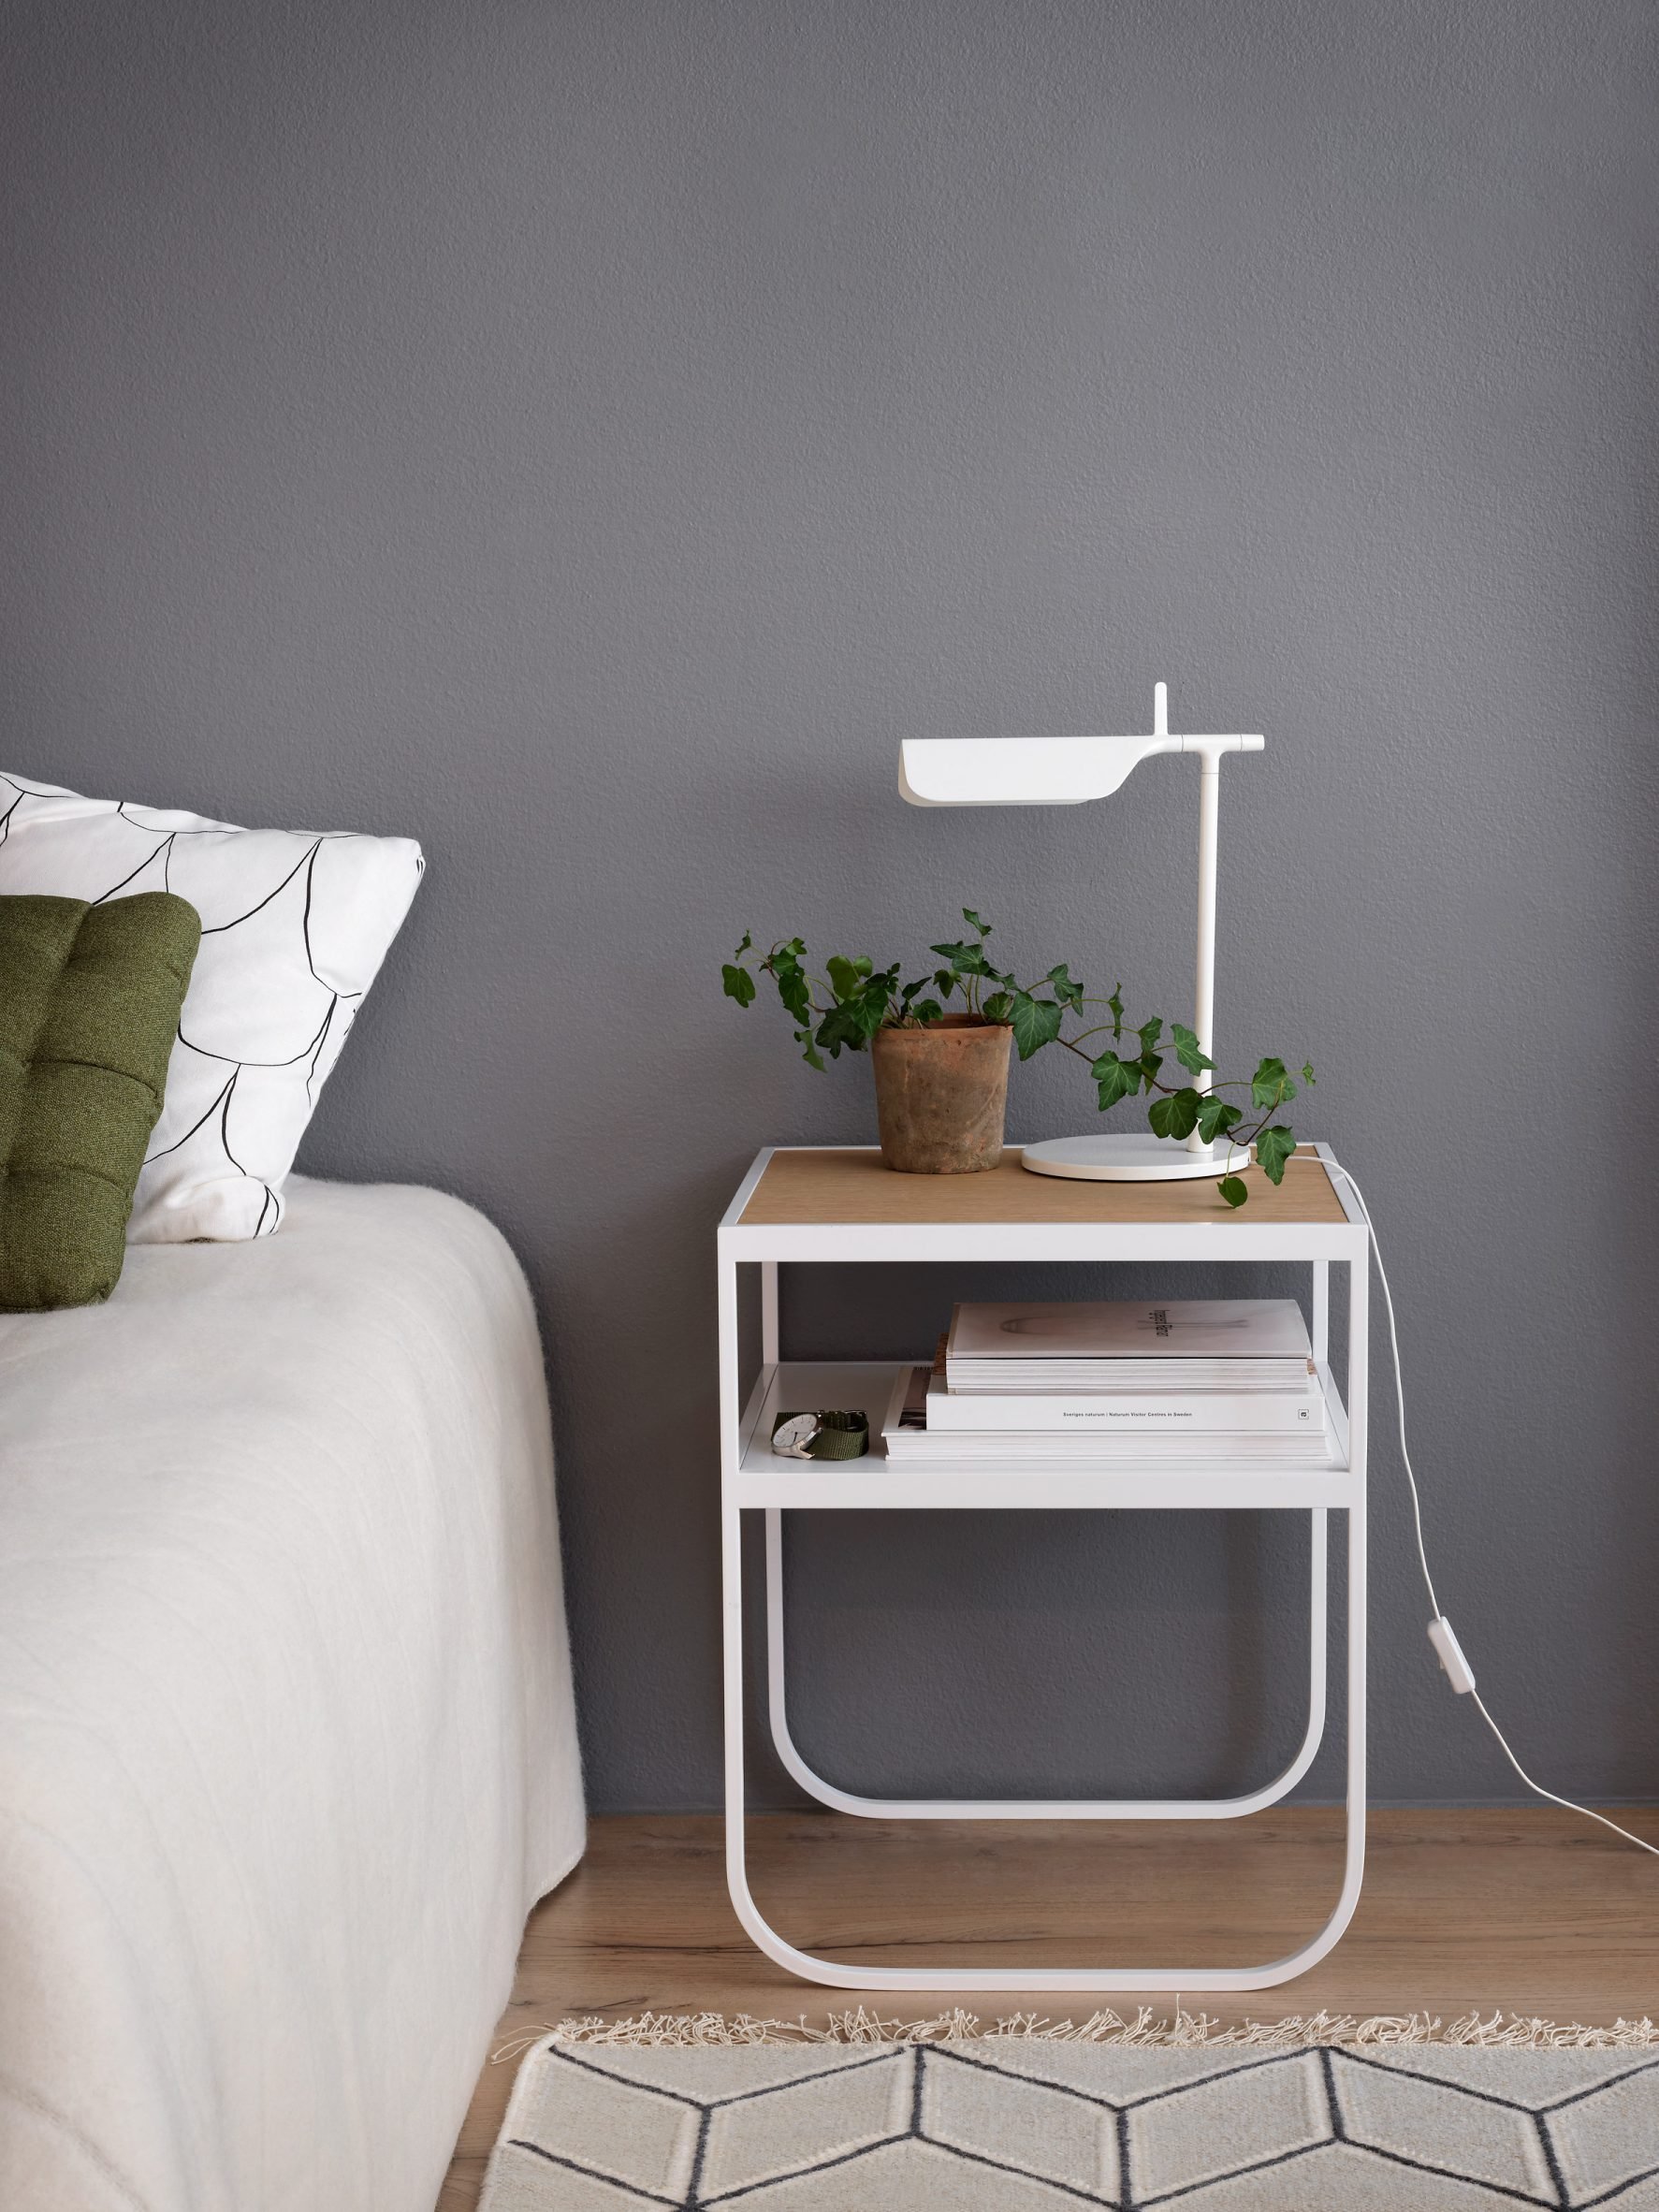 White Tati bedside table on a grey background